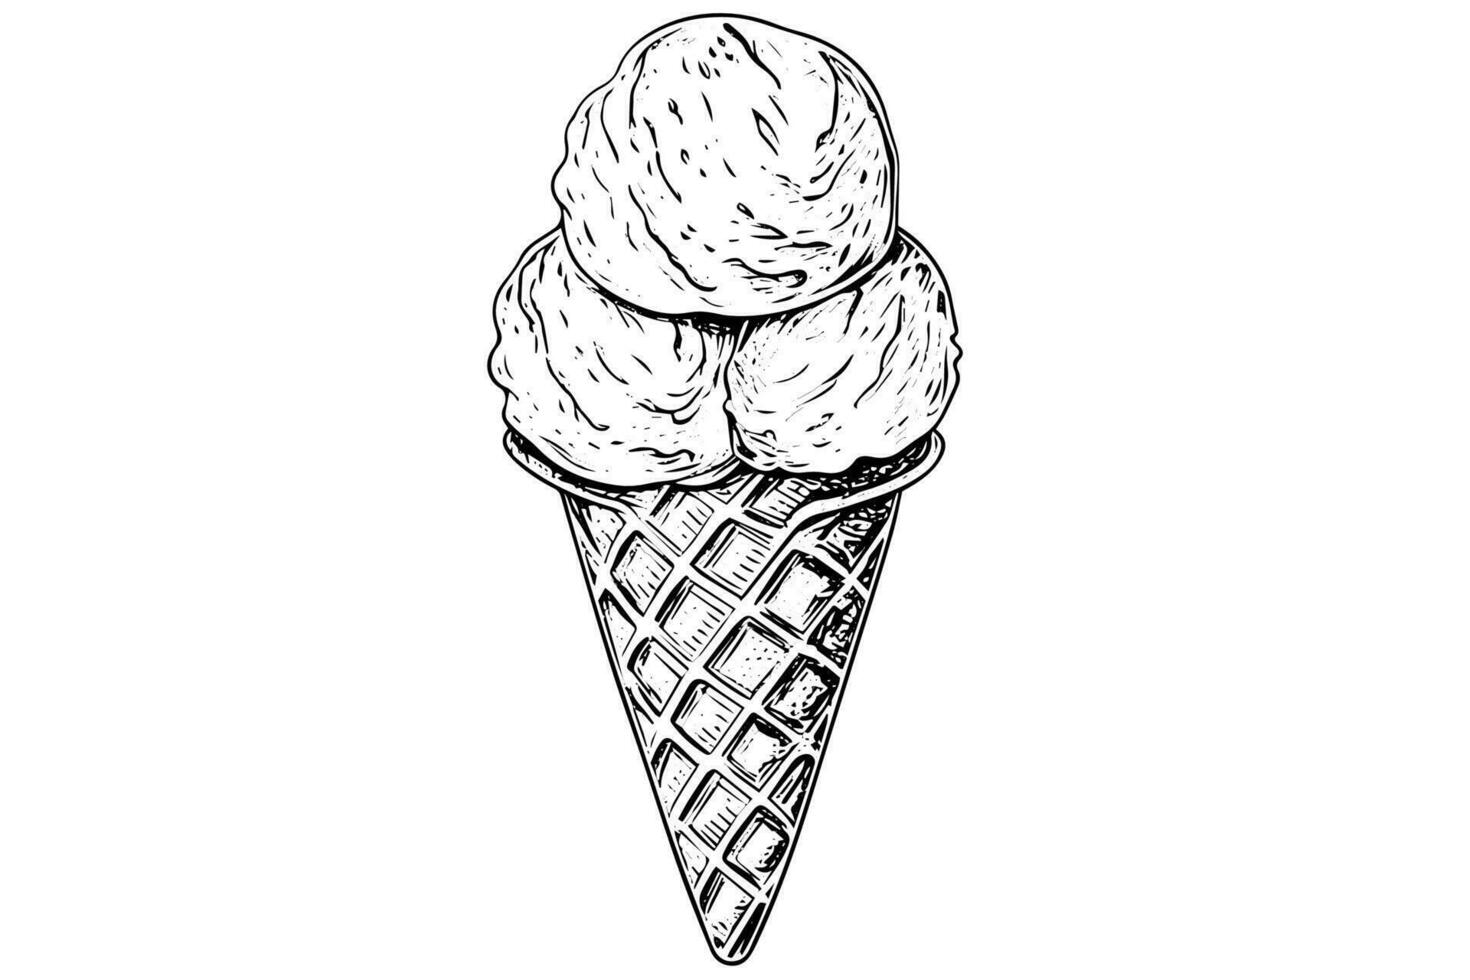 Ice cream cones. Ink hand drawn sketch engraved style vector illustration.